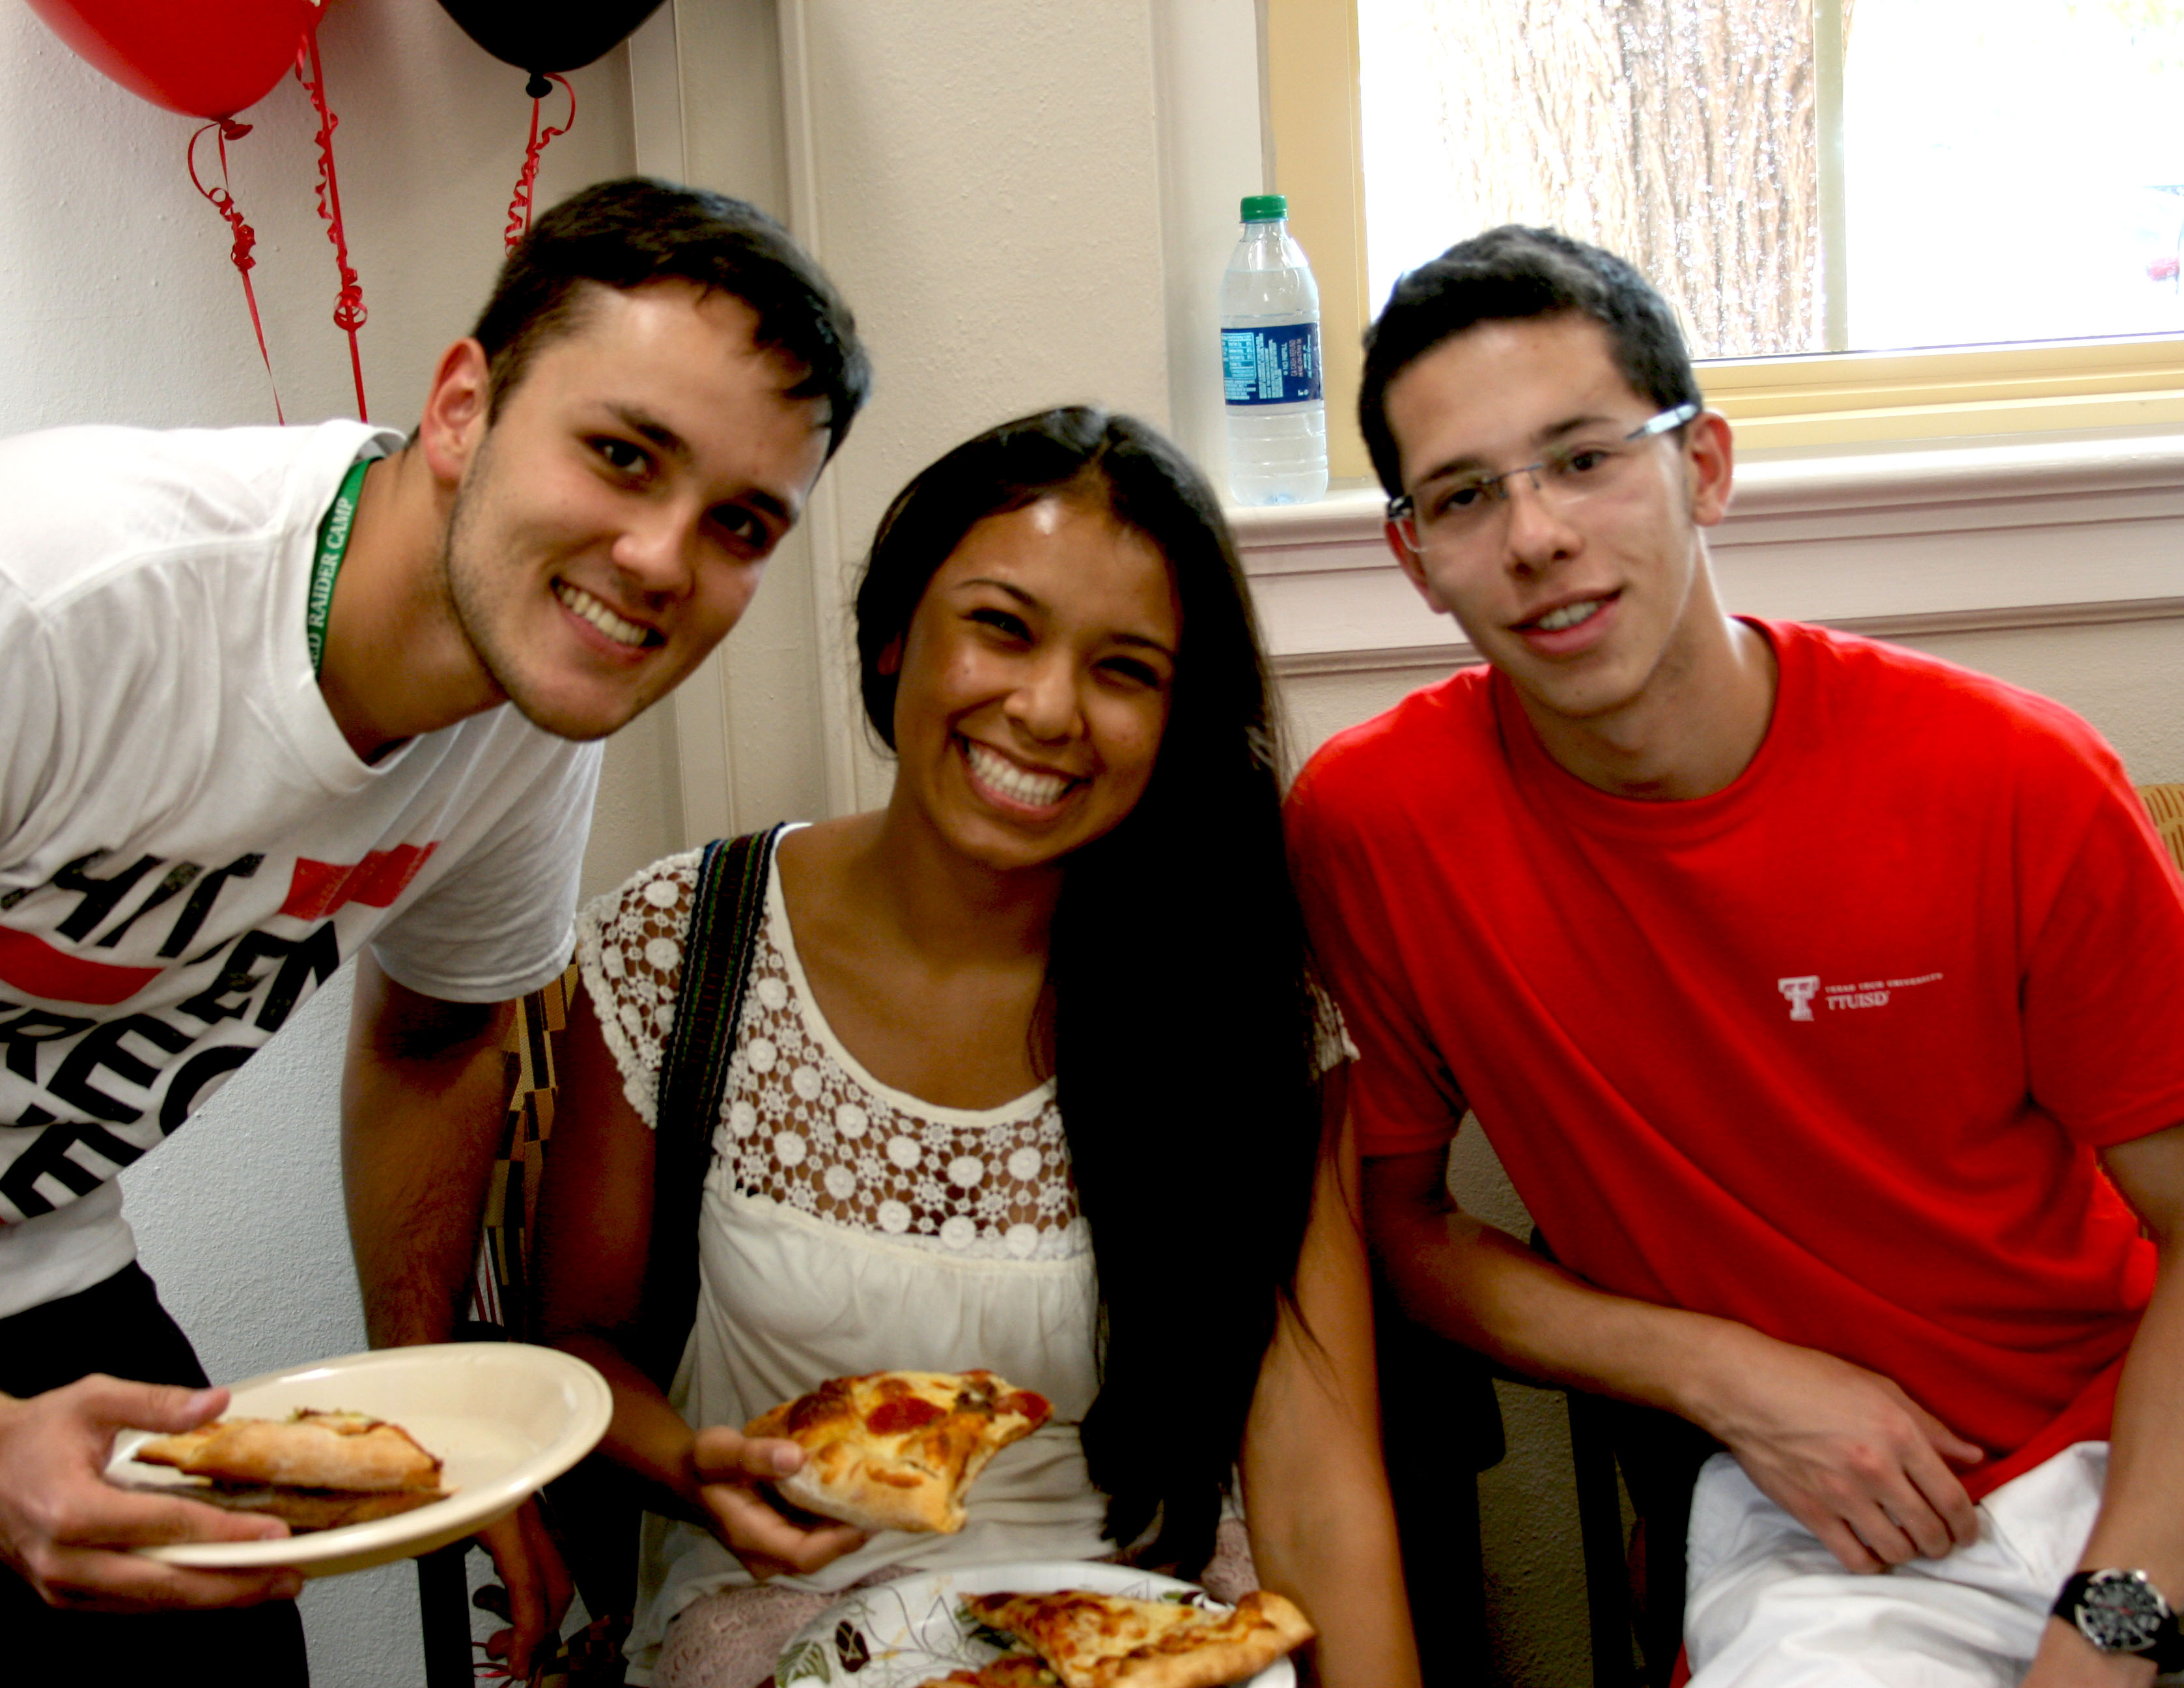 TTU students give smiles at the NWI Open House to kick off the new semester.